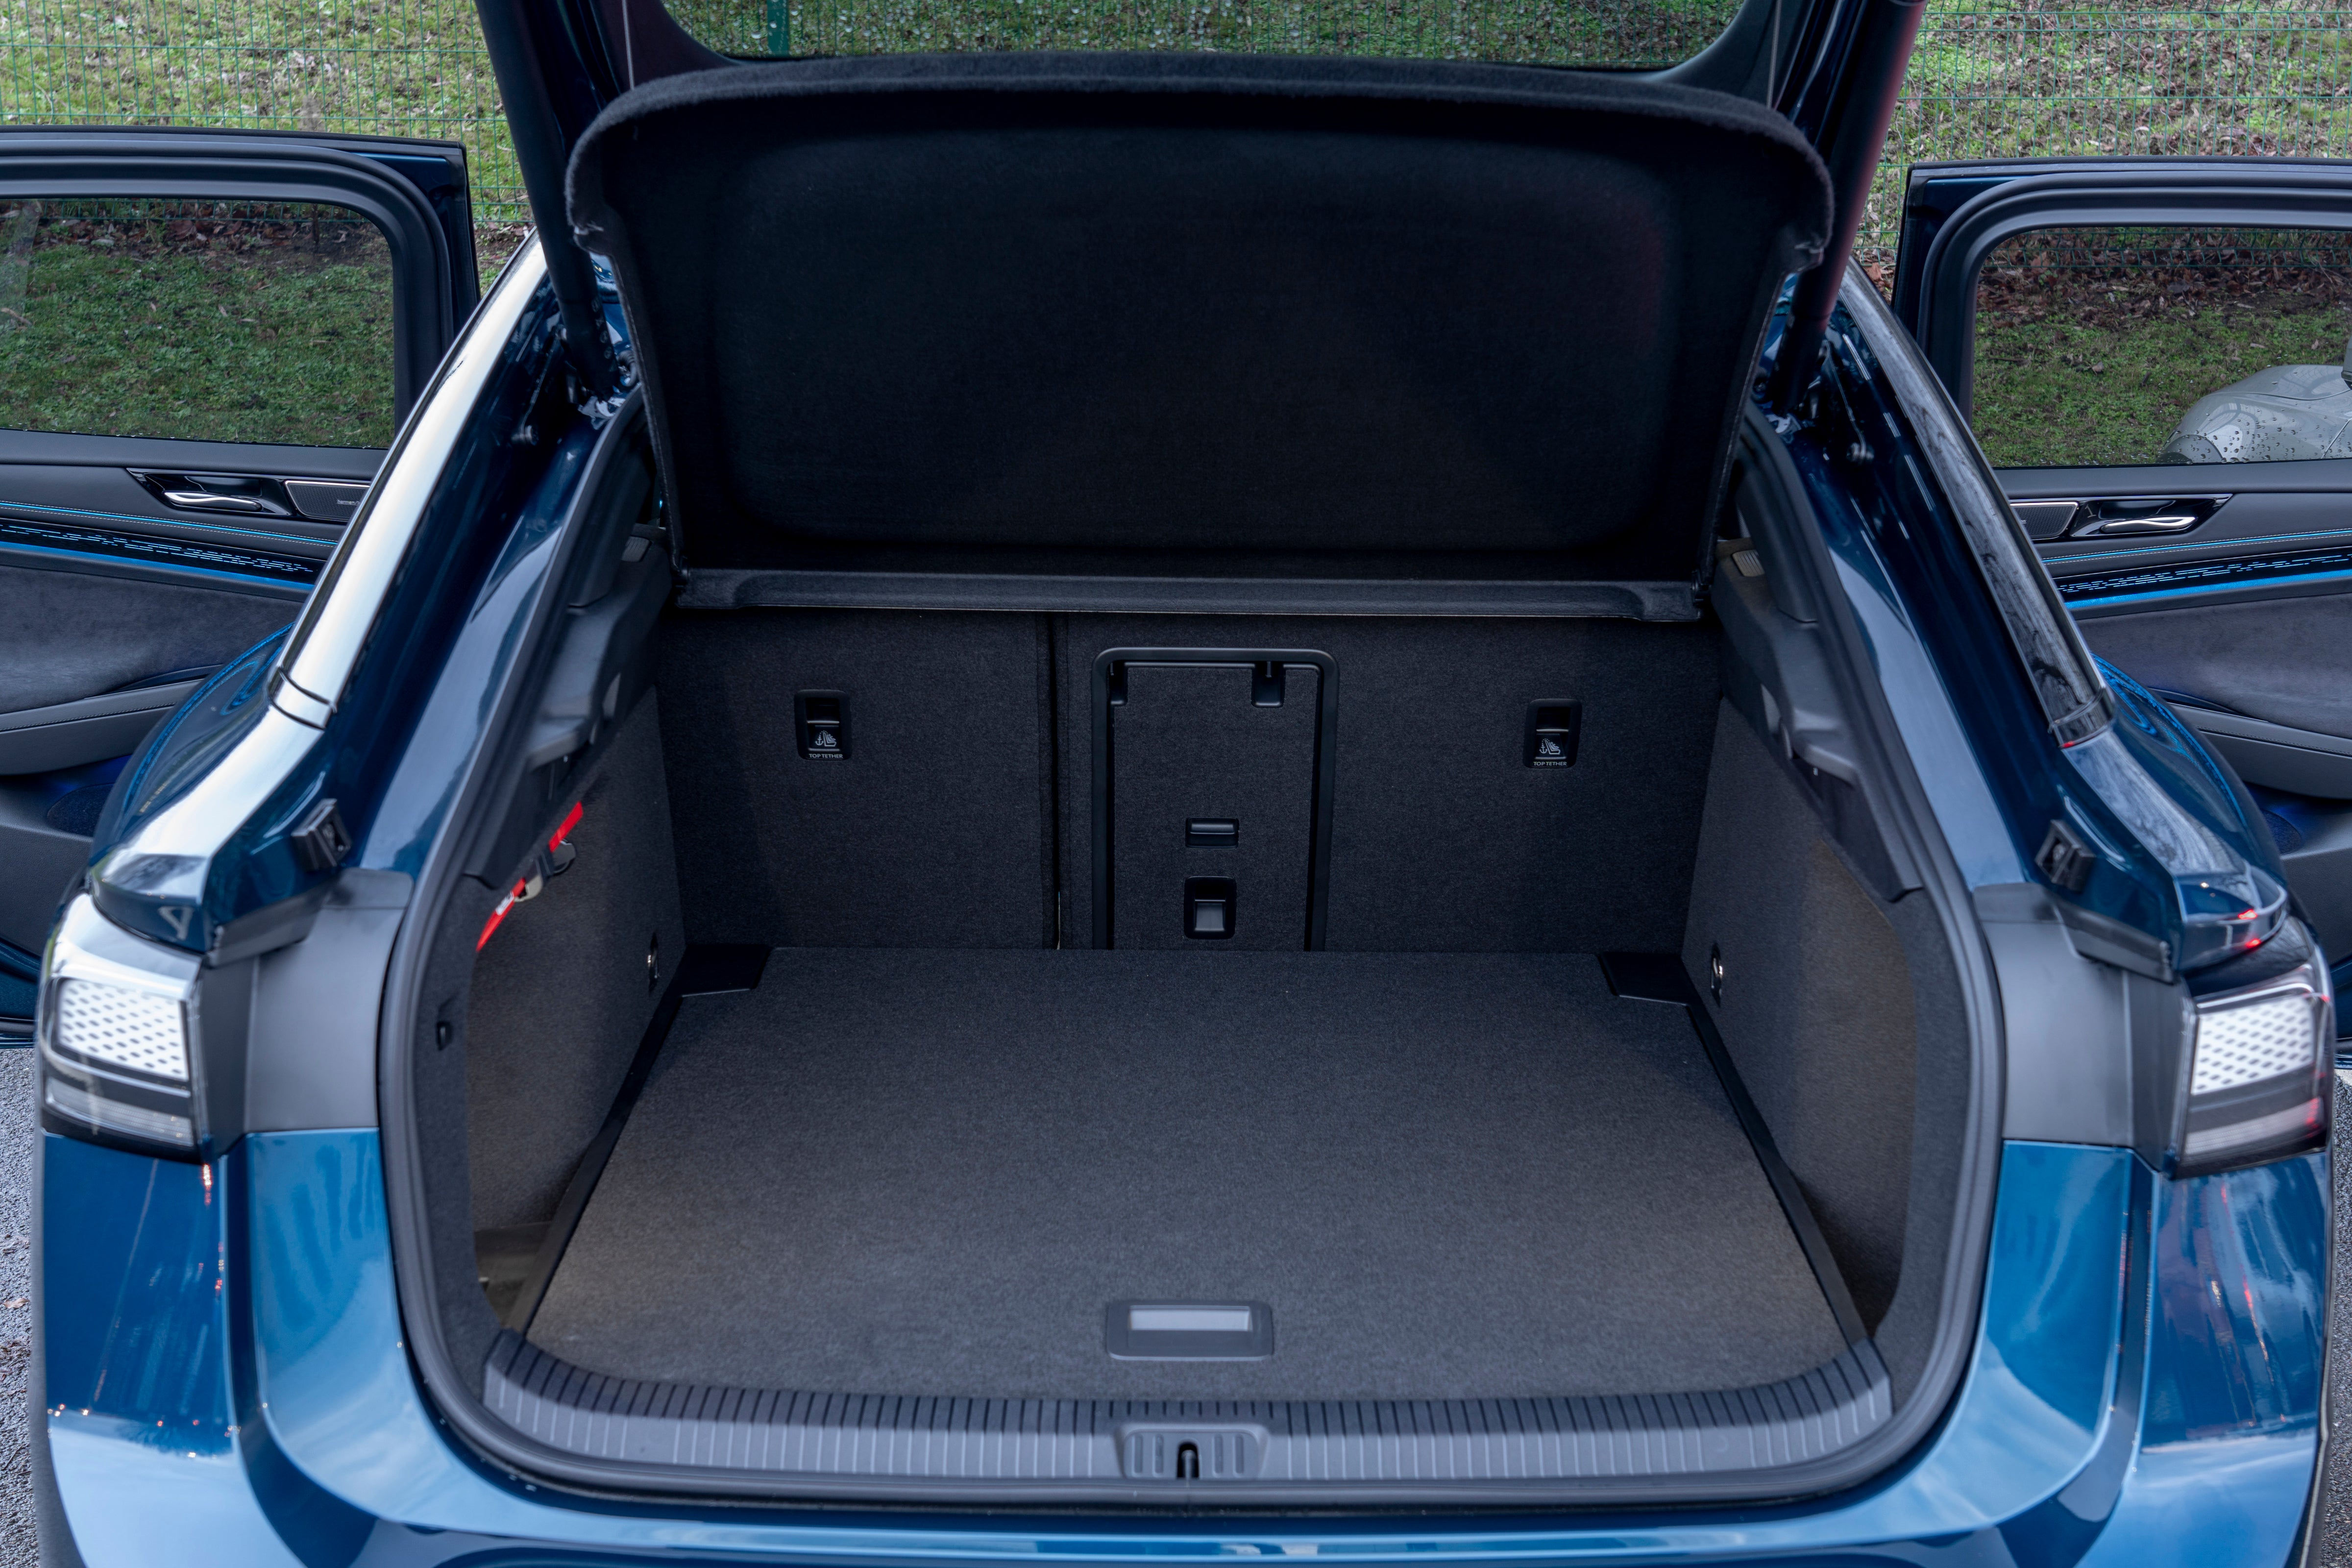 The ID.7 has plenty of space for luggage in its 500-litre boot